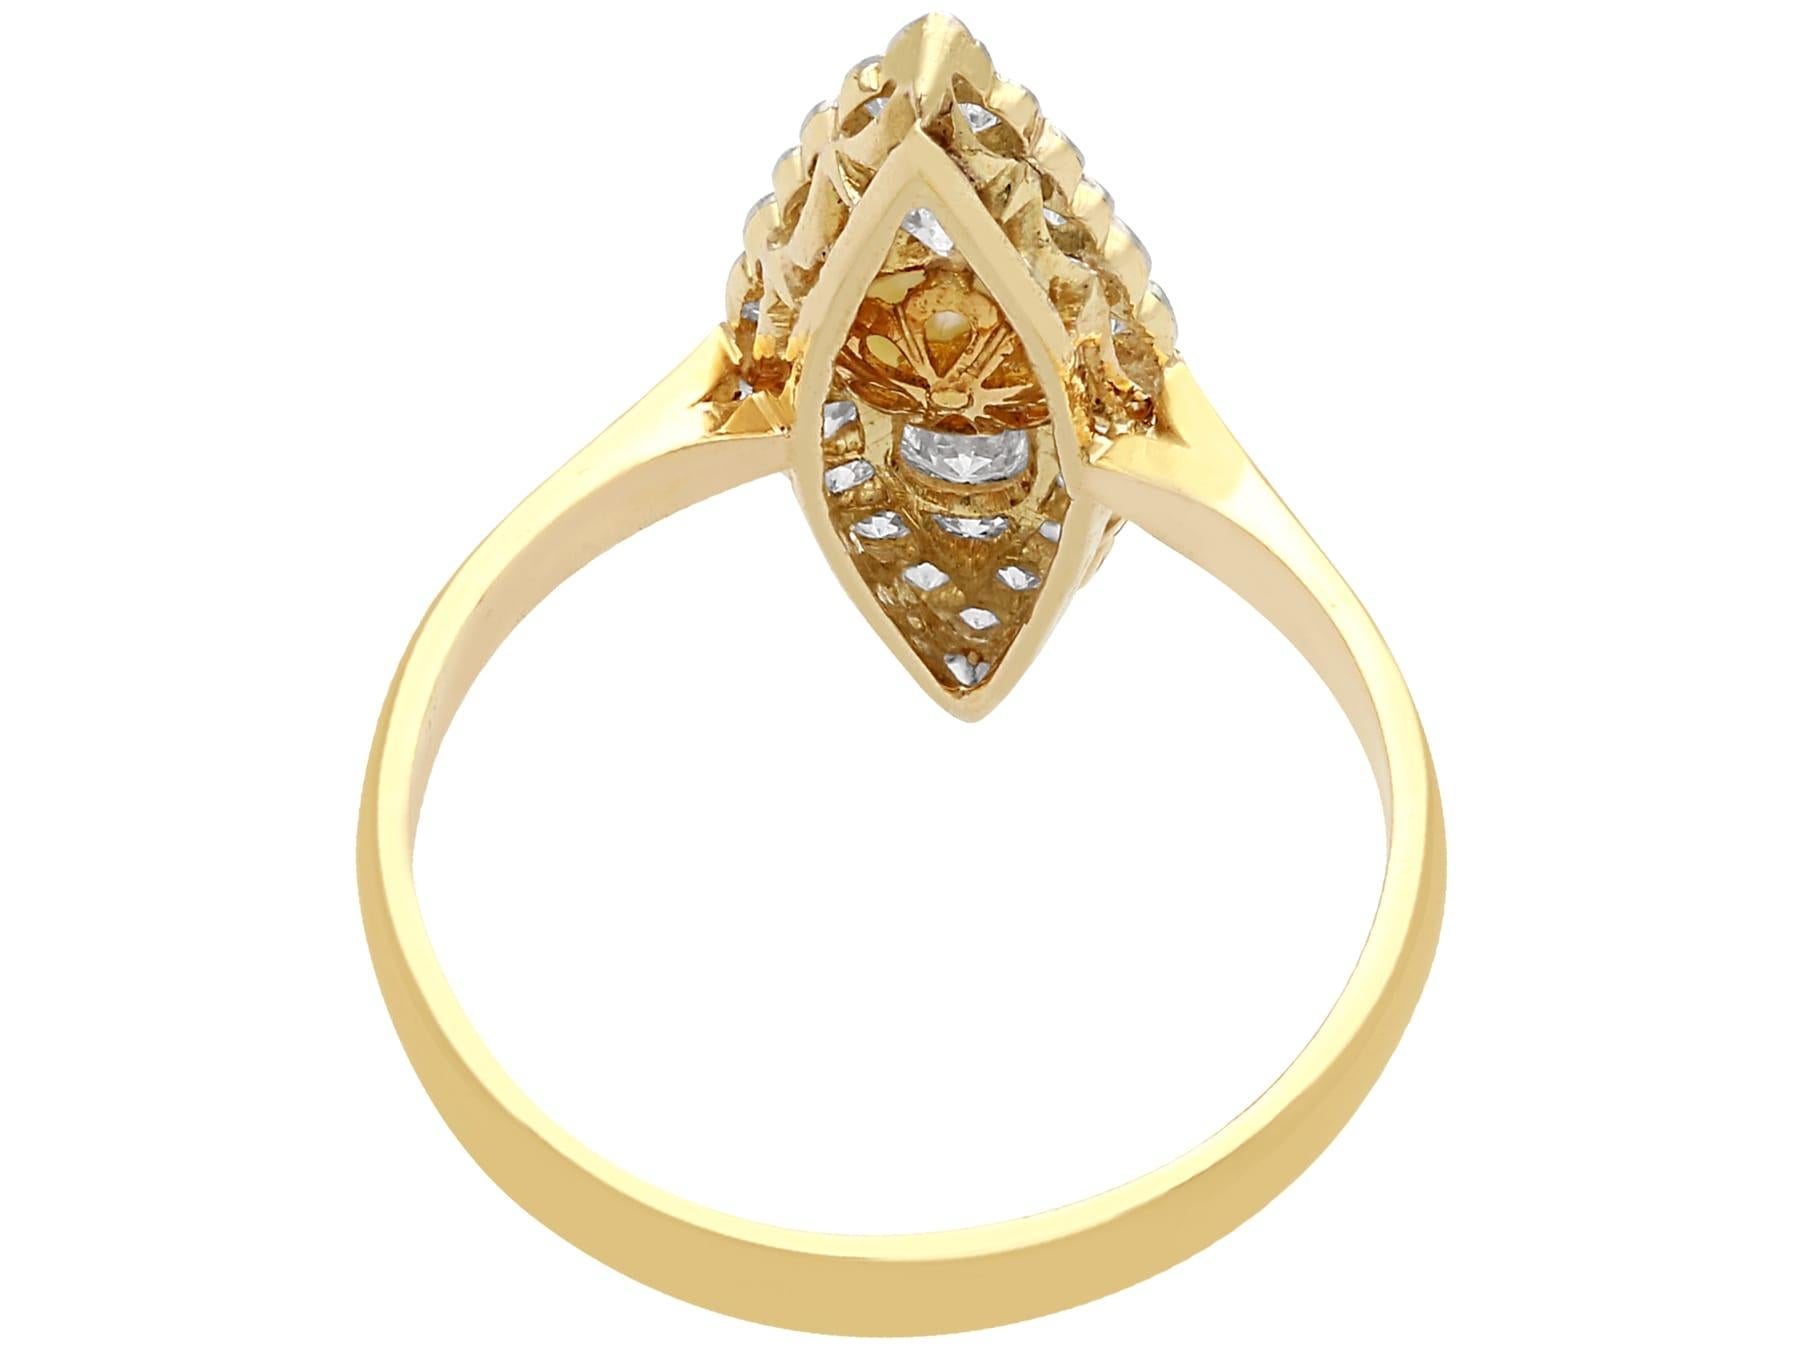 Antique 1920s Pearl and Diamond Yellow Gold Cocktail Ring In Excellent Condition For Sale In Jesmond, Newcastle Upon Tyne